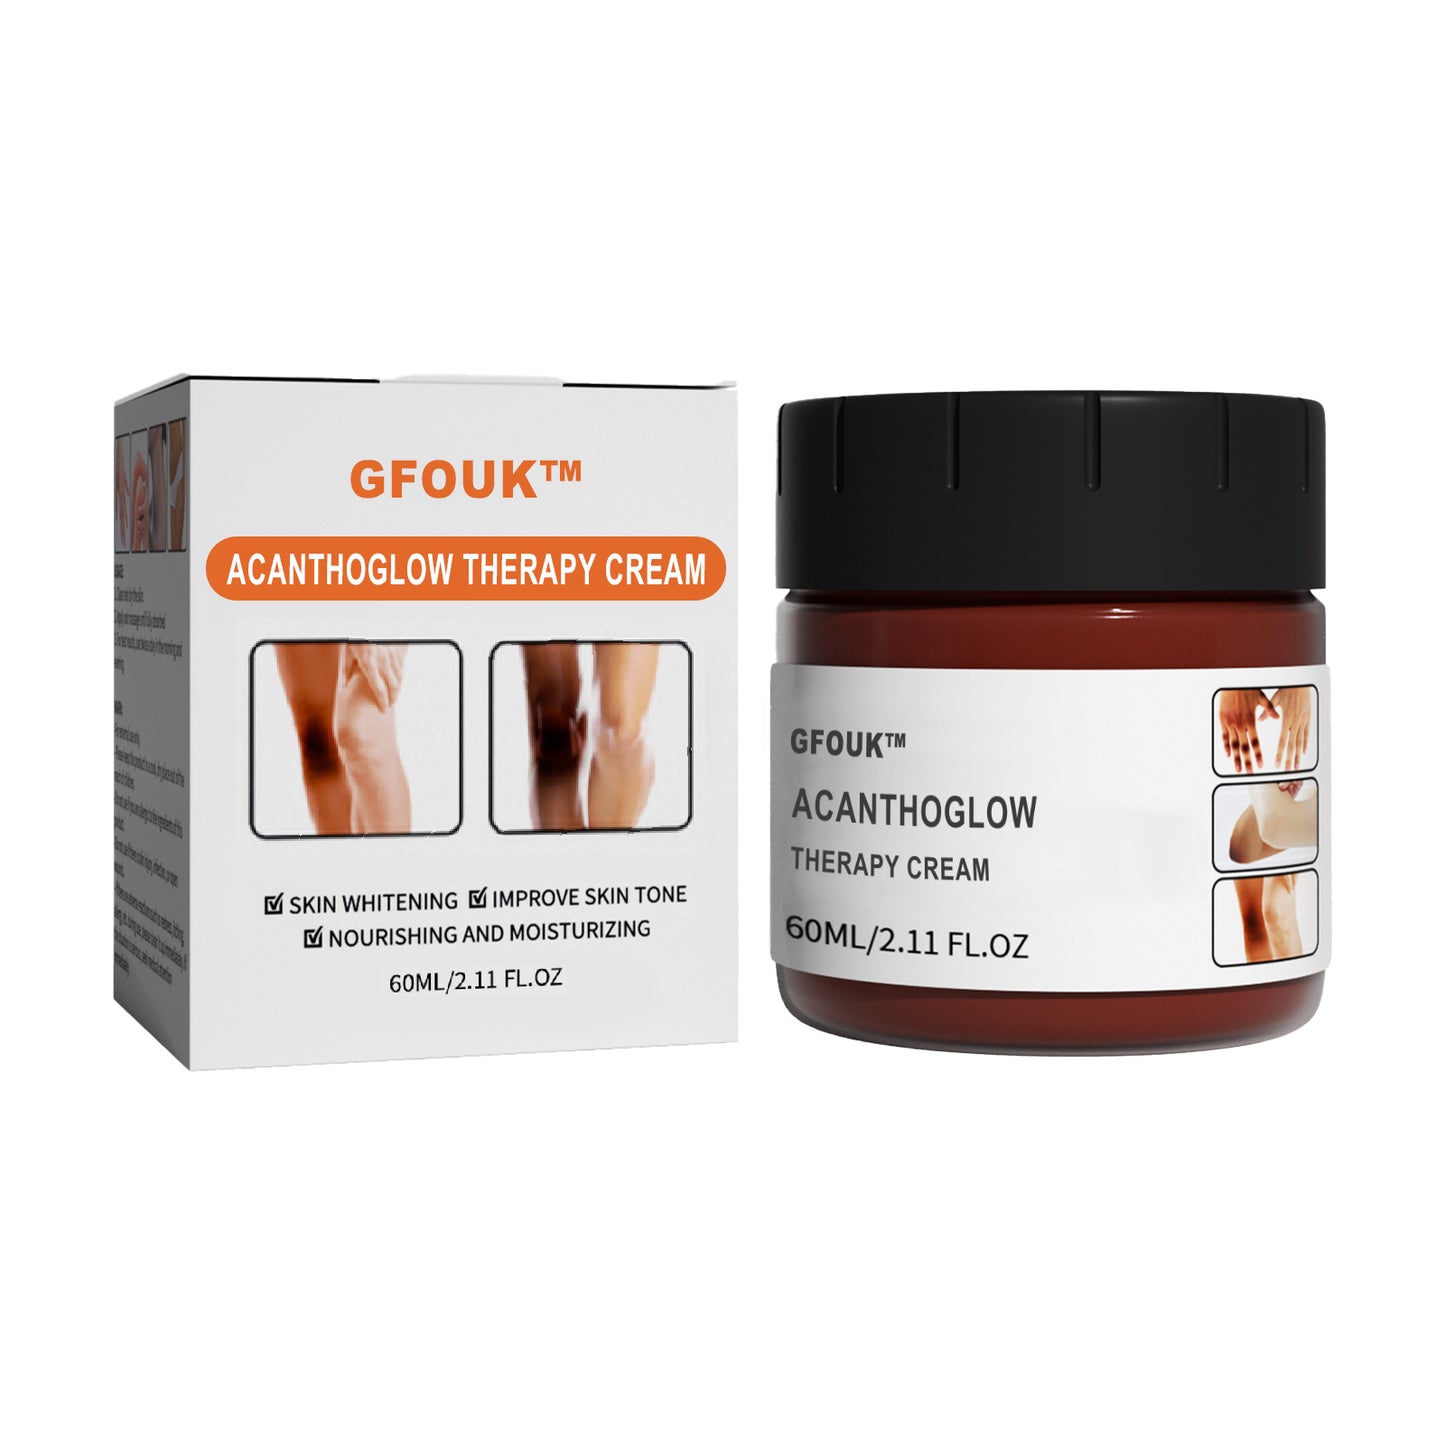 GFOUK™ AcanthoGlow Therapy Cream